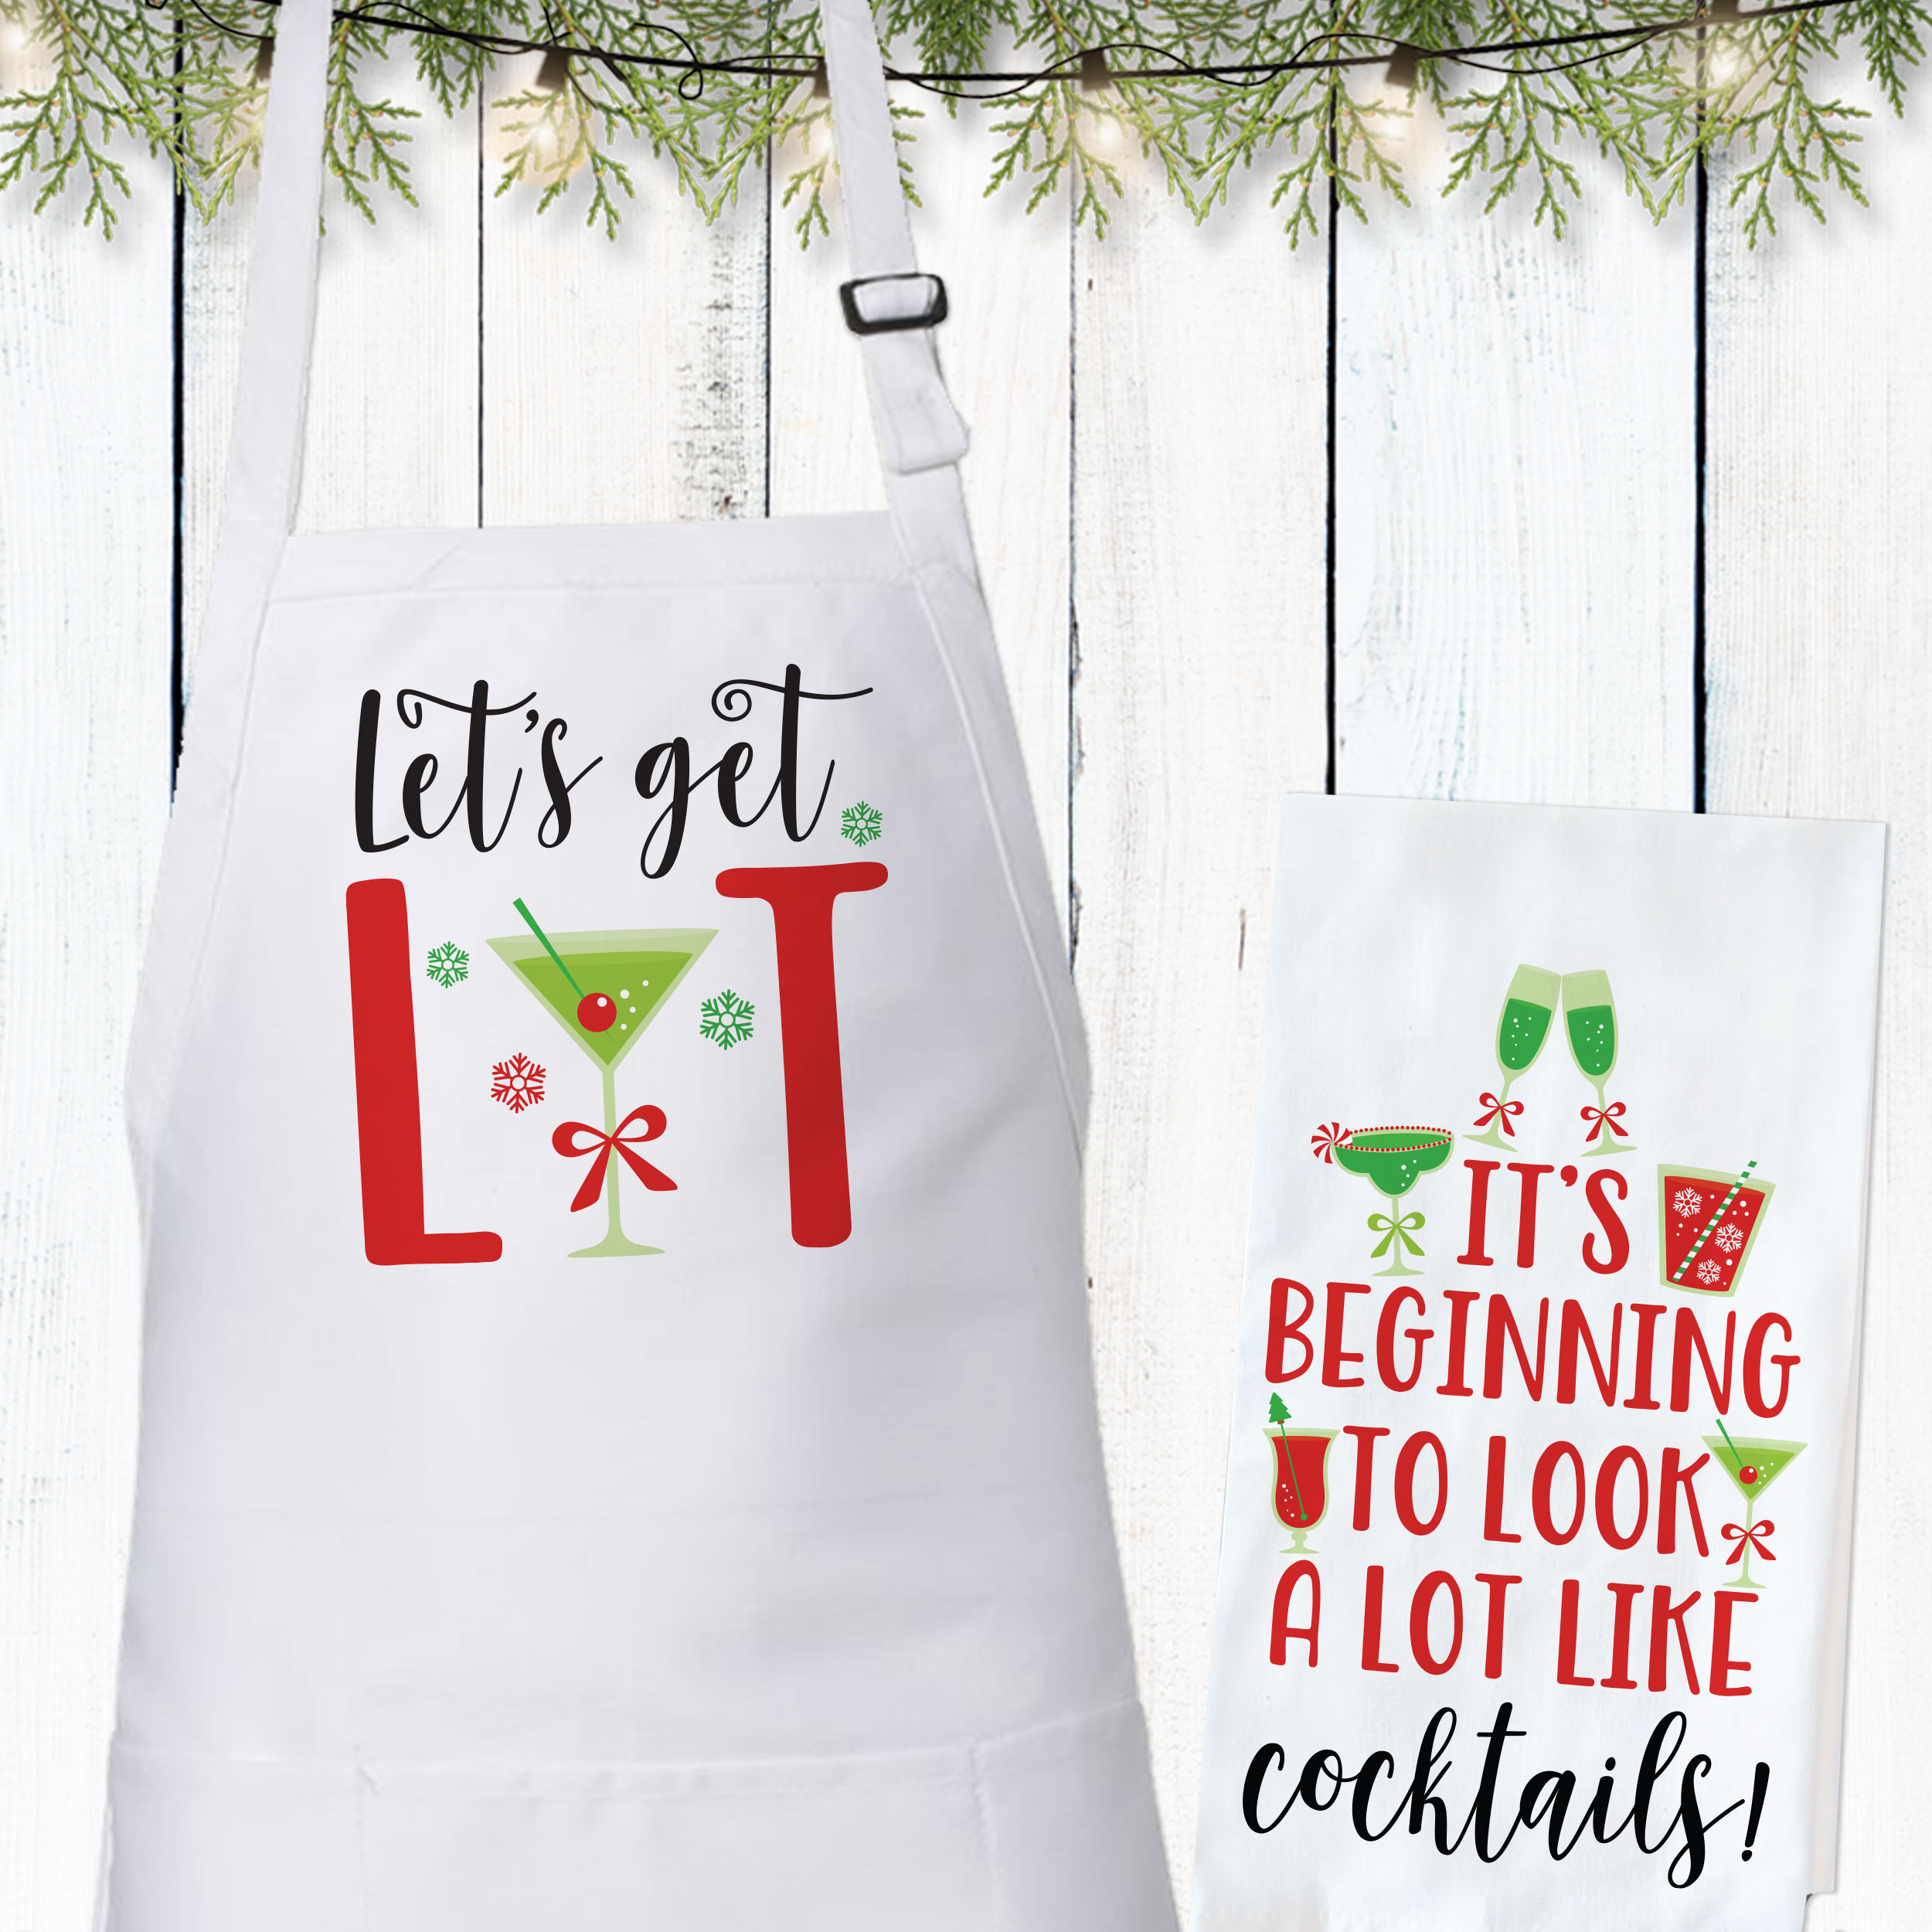 https://cdn11.bigcommerce.com/s-5grzuu6/images/stencil/original/products/6431/51641/Lets-Get-Lit-Holiday-Apron-and-Tea_Towel__37926.1669402935.jpg?c=2